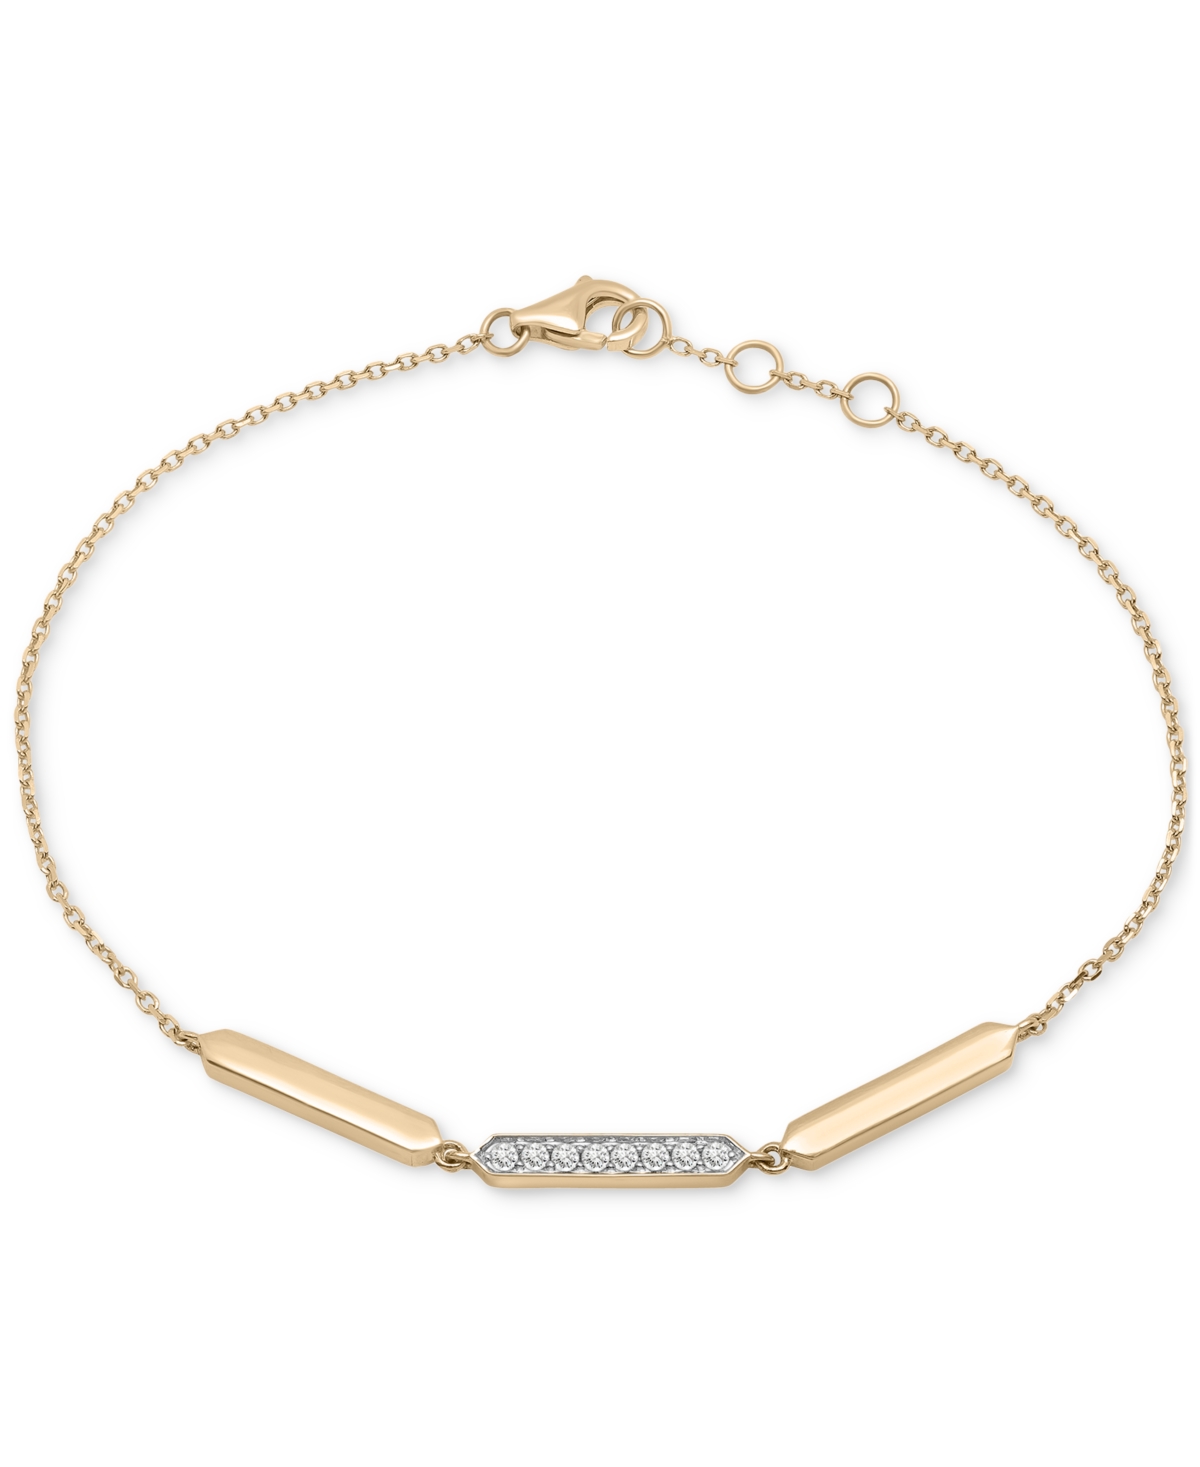 Diamond & Polished Bar Bracelet (1/10 ct. t.w.) in 14k Gold, Created for Macy's - Yellow Gold